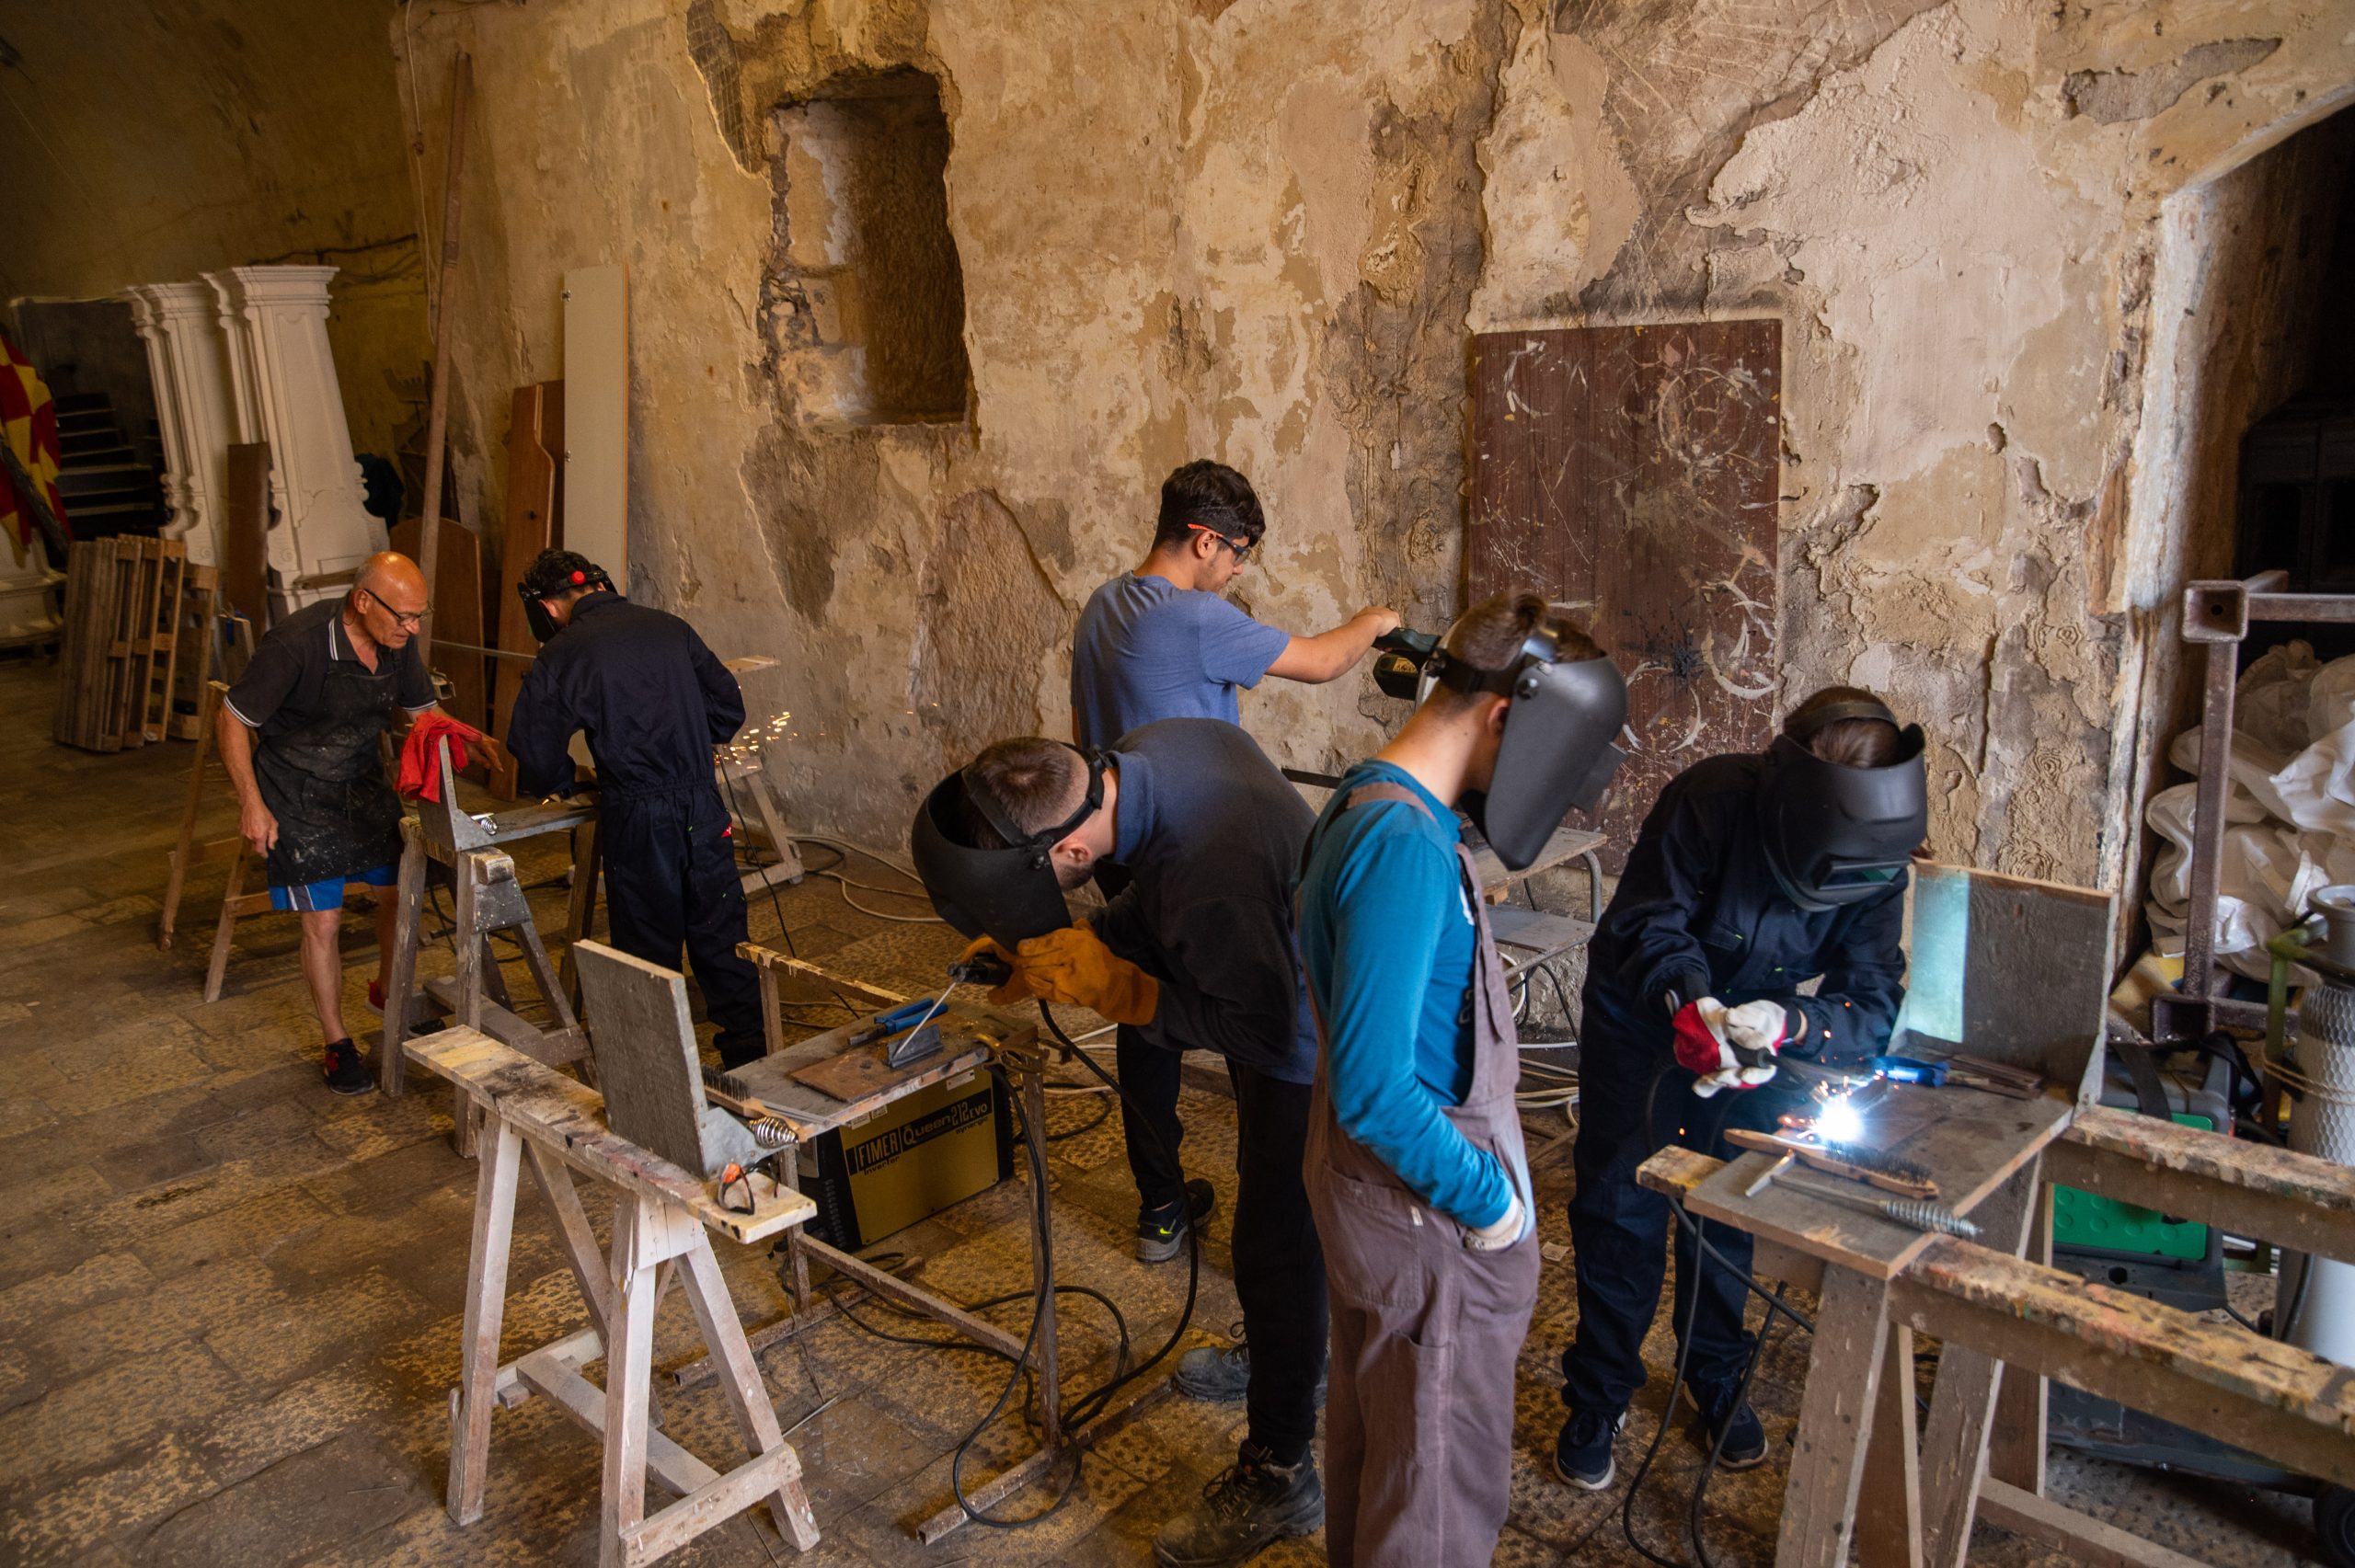 Empowering Youth in Senglea